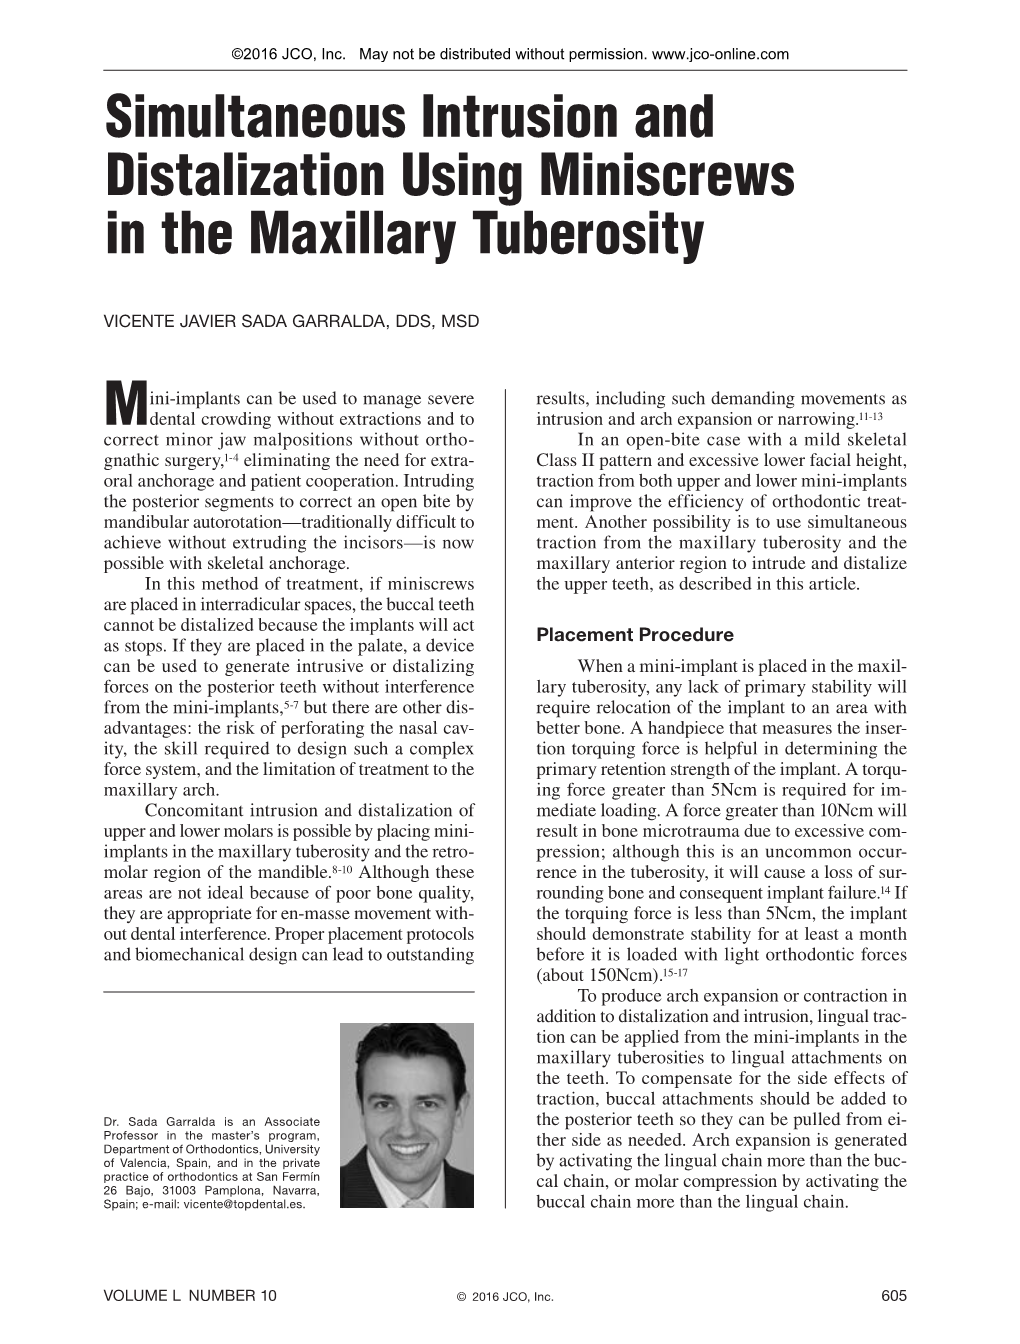 Simultaneous Intrusion and Distalization Using Miniscrews in the Maxillary Tuberosity